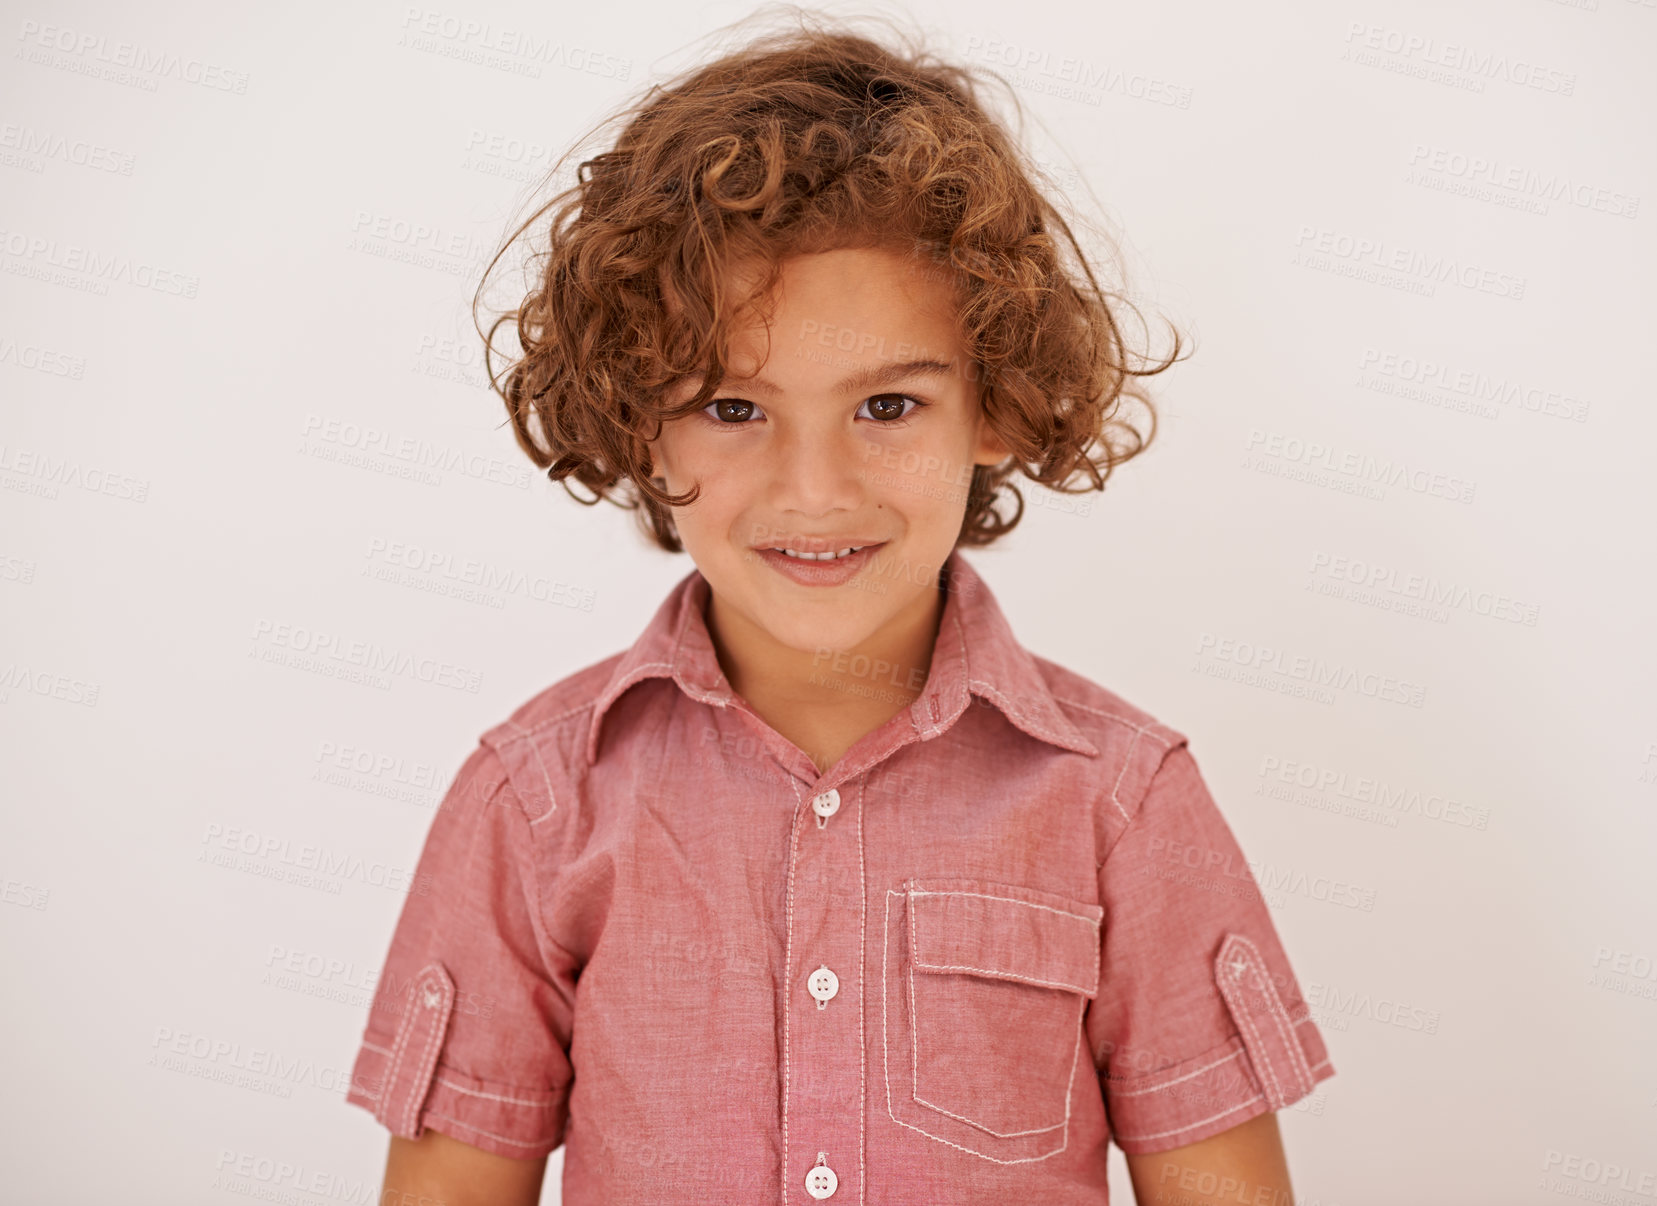 Buy stock photo Smile, fashion and boy child in studio with casual, trendy and cool shirt for outfit with curly hair. Happy, cute and portrait of adorable young kid model with style isolated by white background.